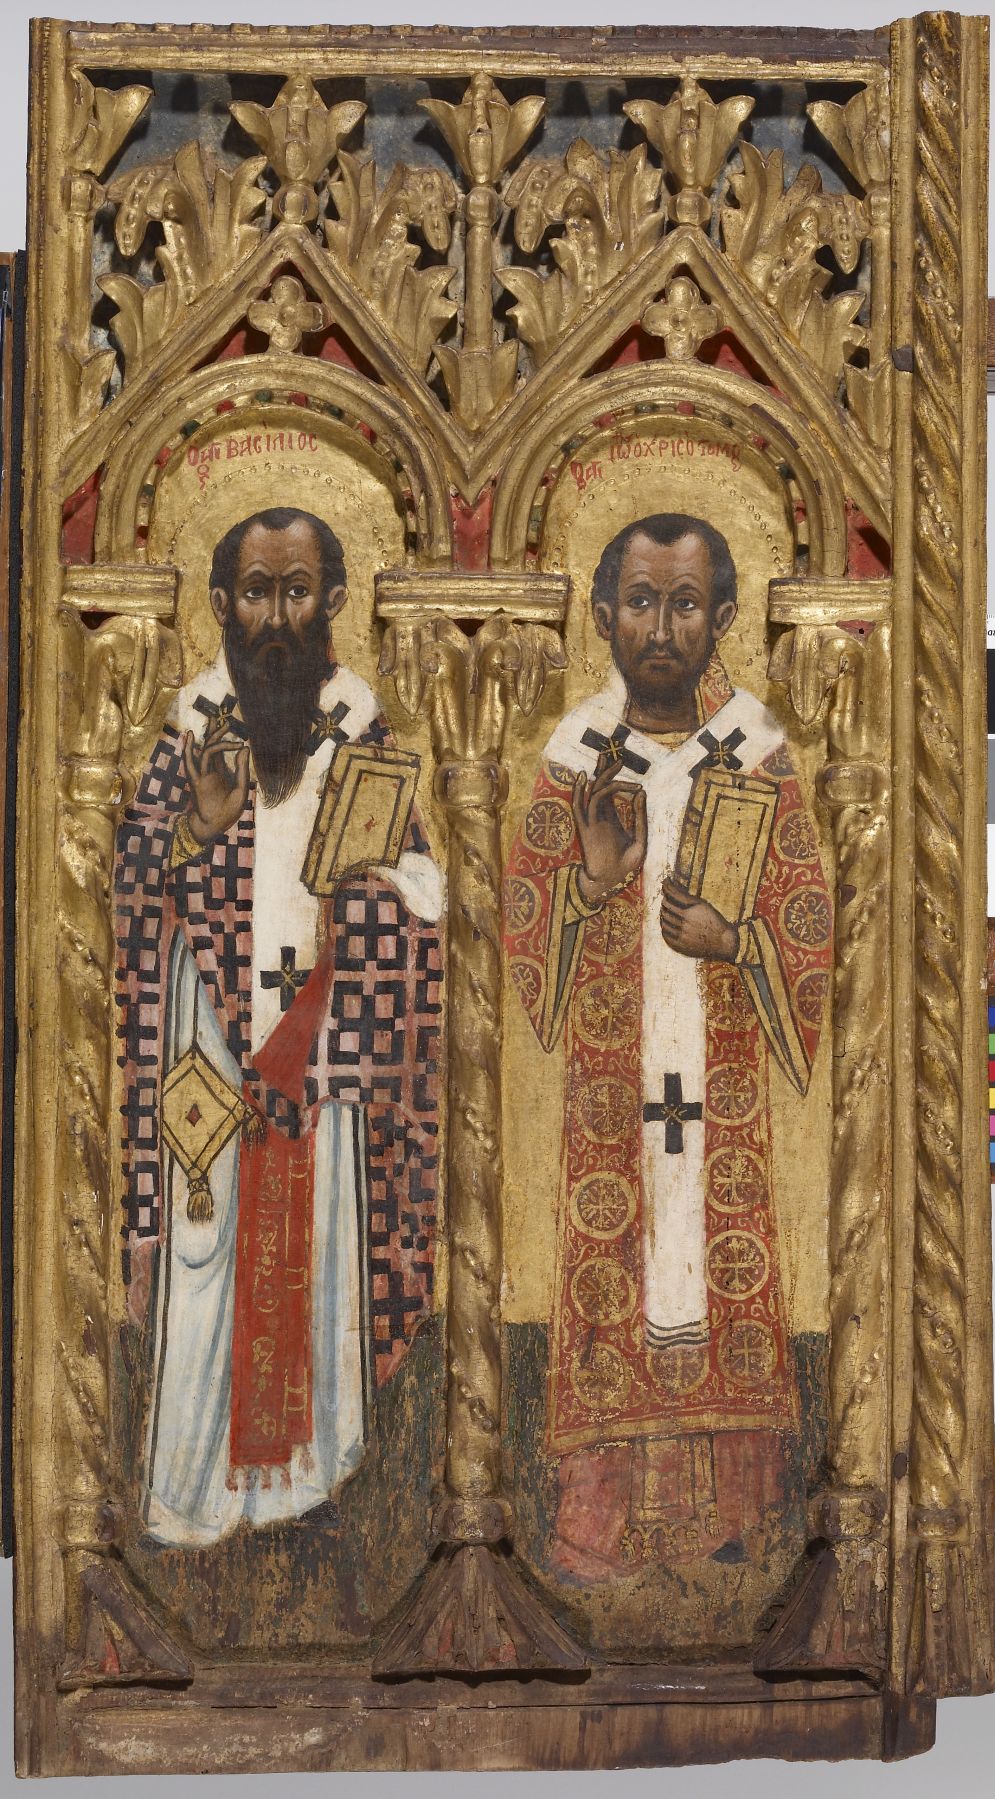 Fragments from Iconostasis Doors Cypriot (17th century, Cyprus) - Public Domain Byzantine Icon